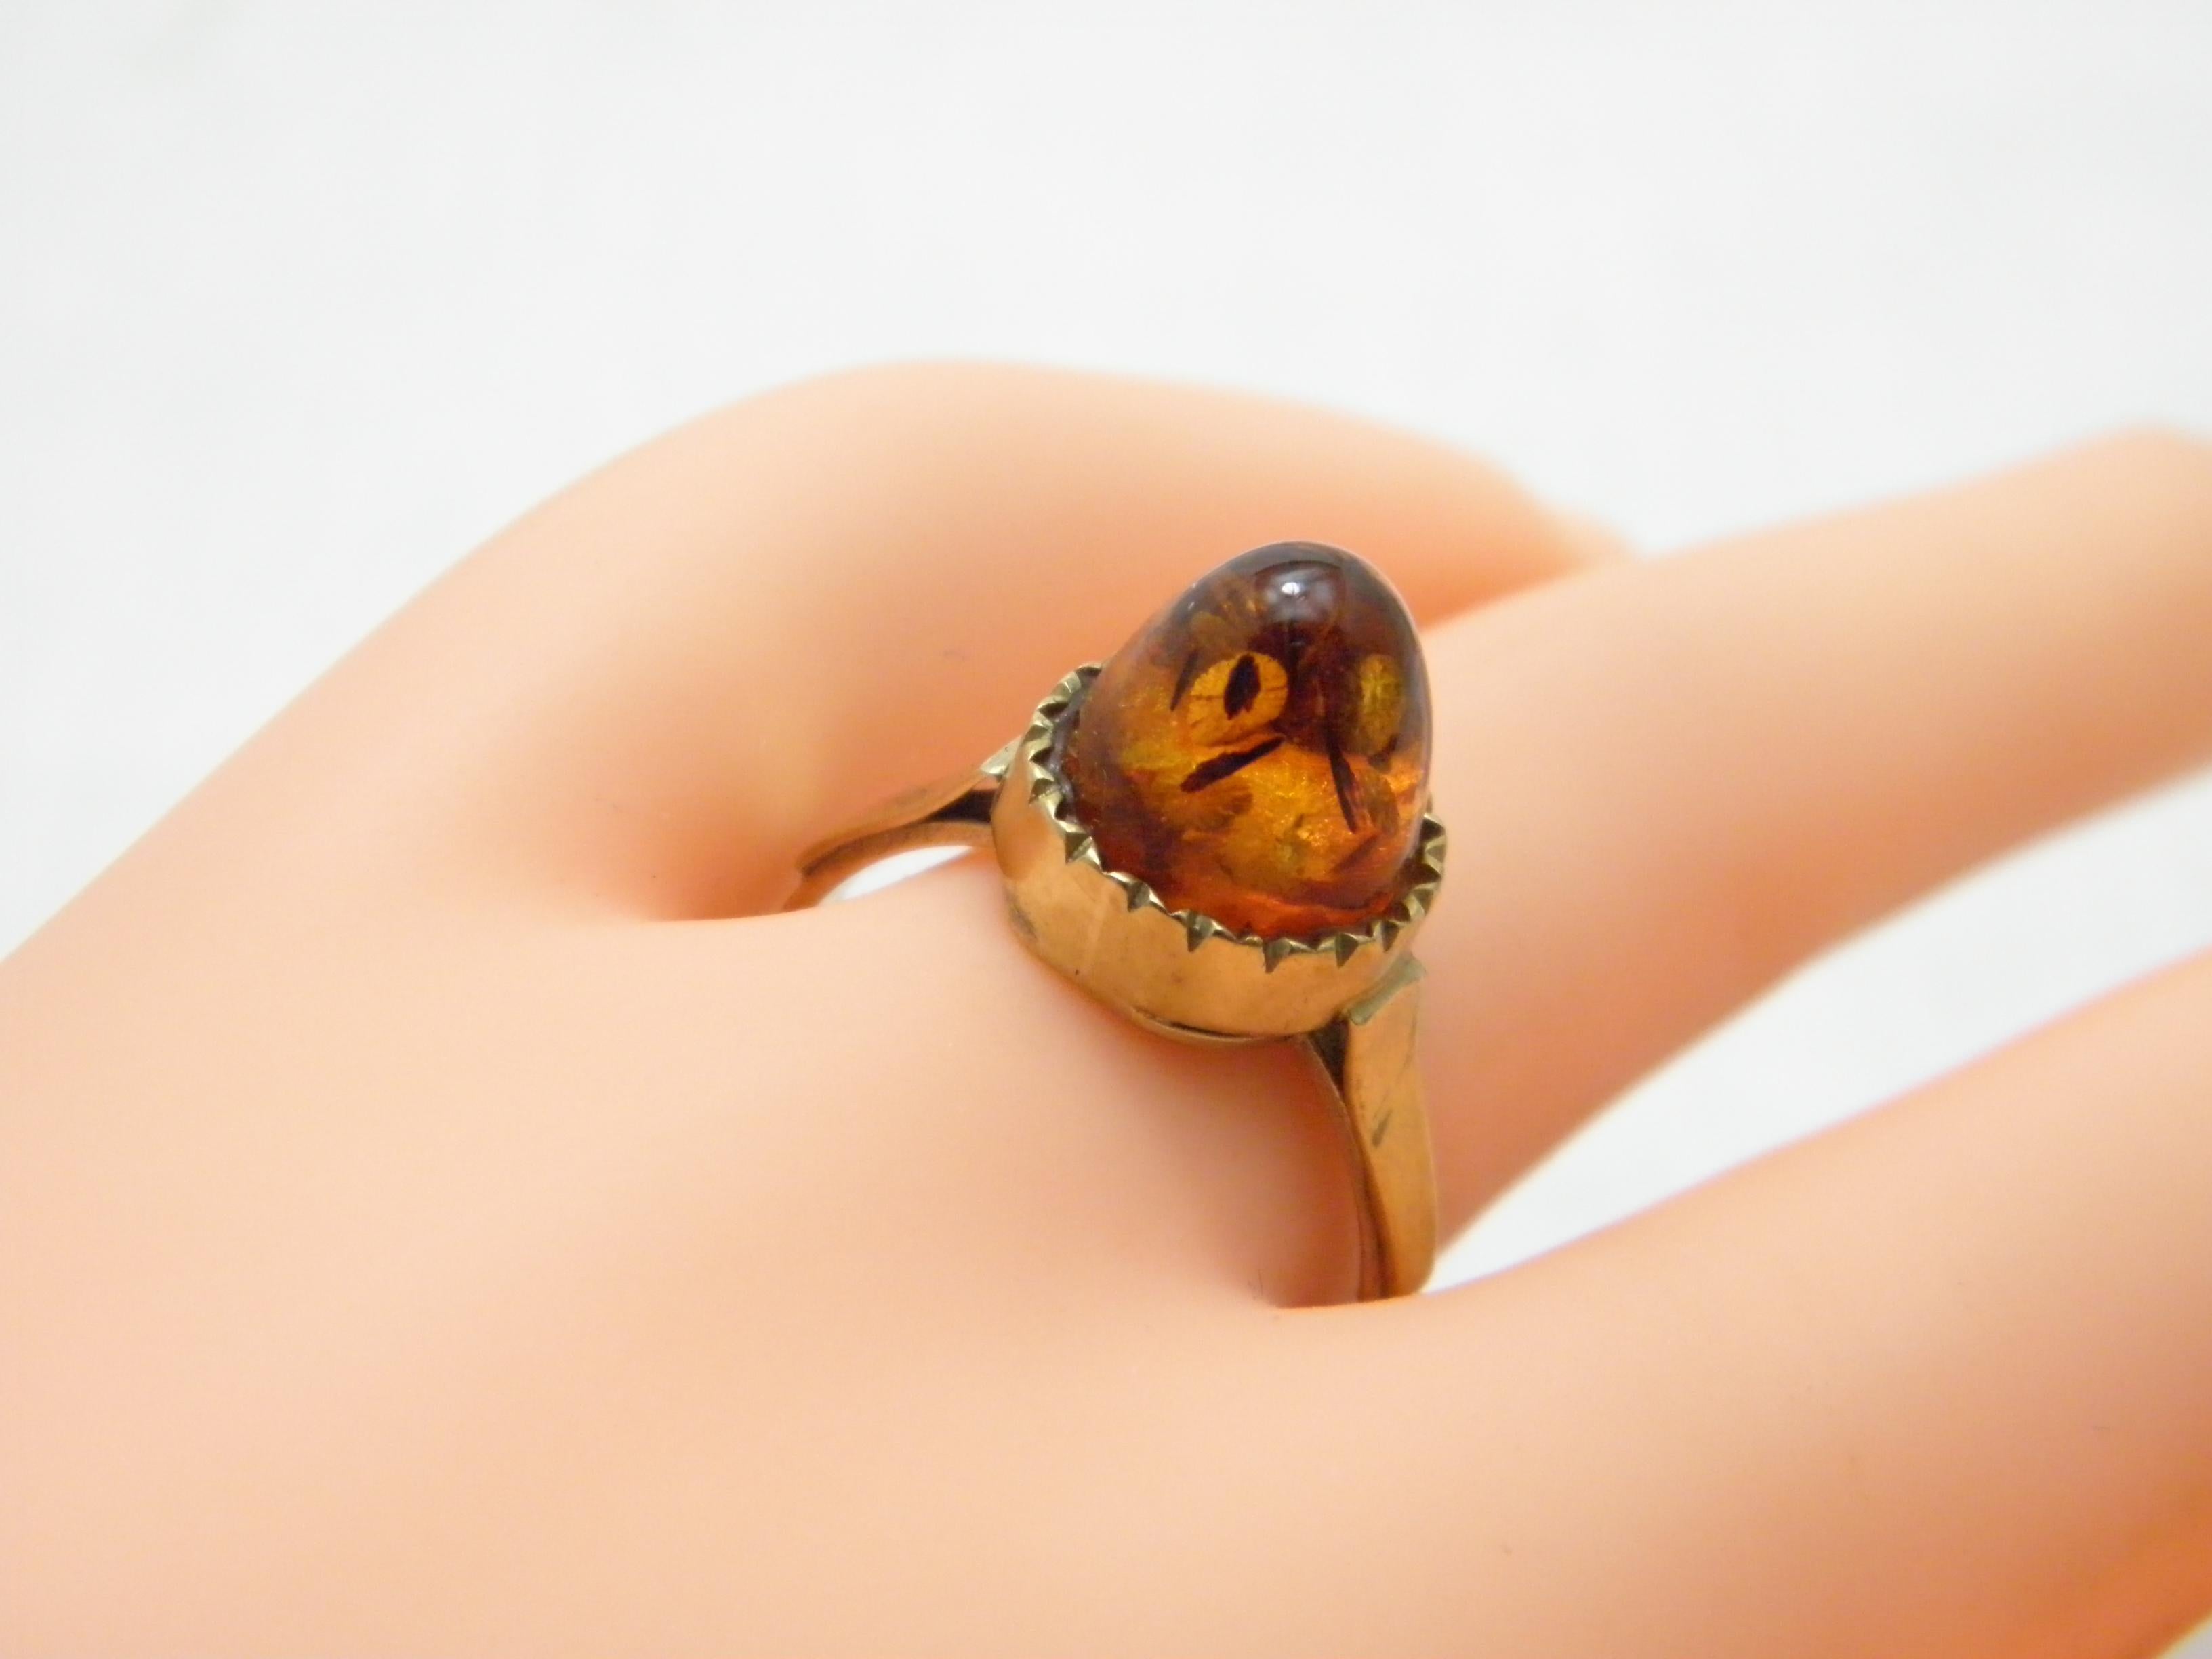 If you have landed on this page then you have an eye for beauty.

On offer is this gorgeous

8CT GOLD ART DECO AMBER BULLET STATEMENT RING

DETAILS
Material: 8ct 333/000 Thick Yellow Gold
This ring has a good shank hence ideal if resizing